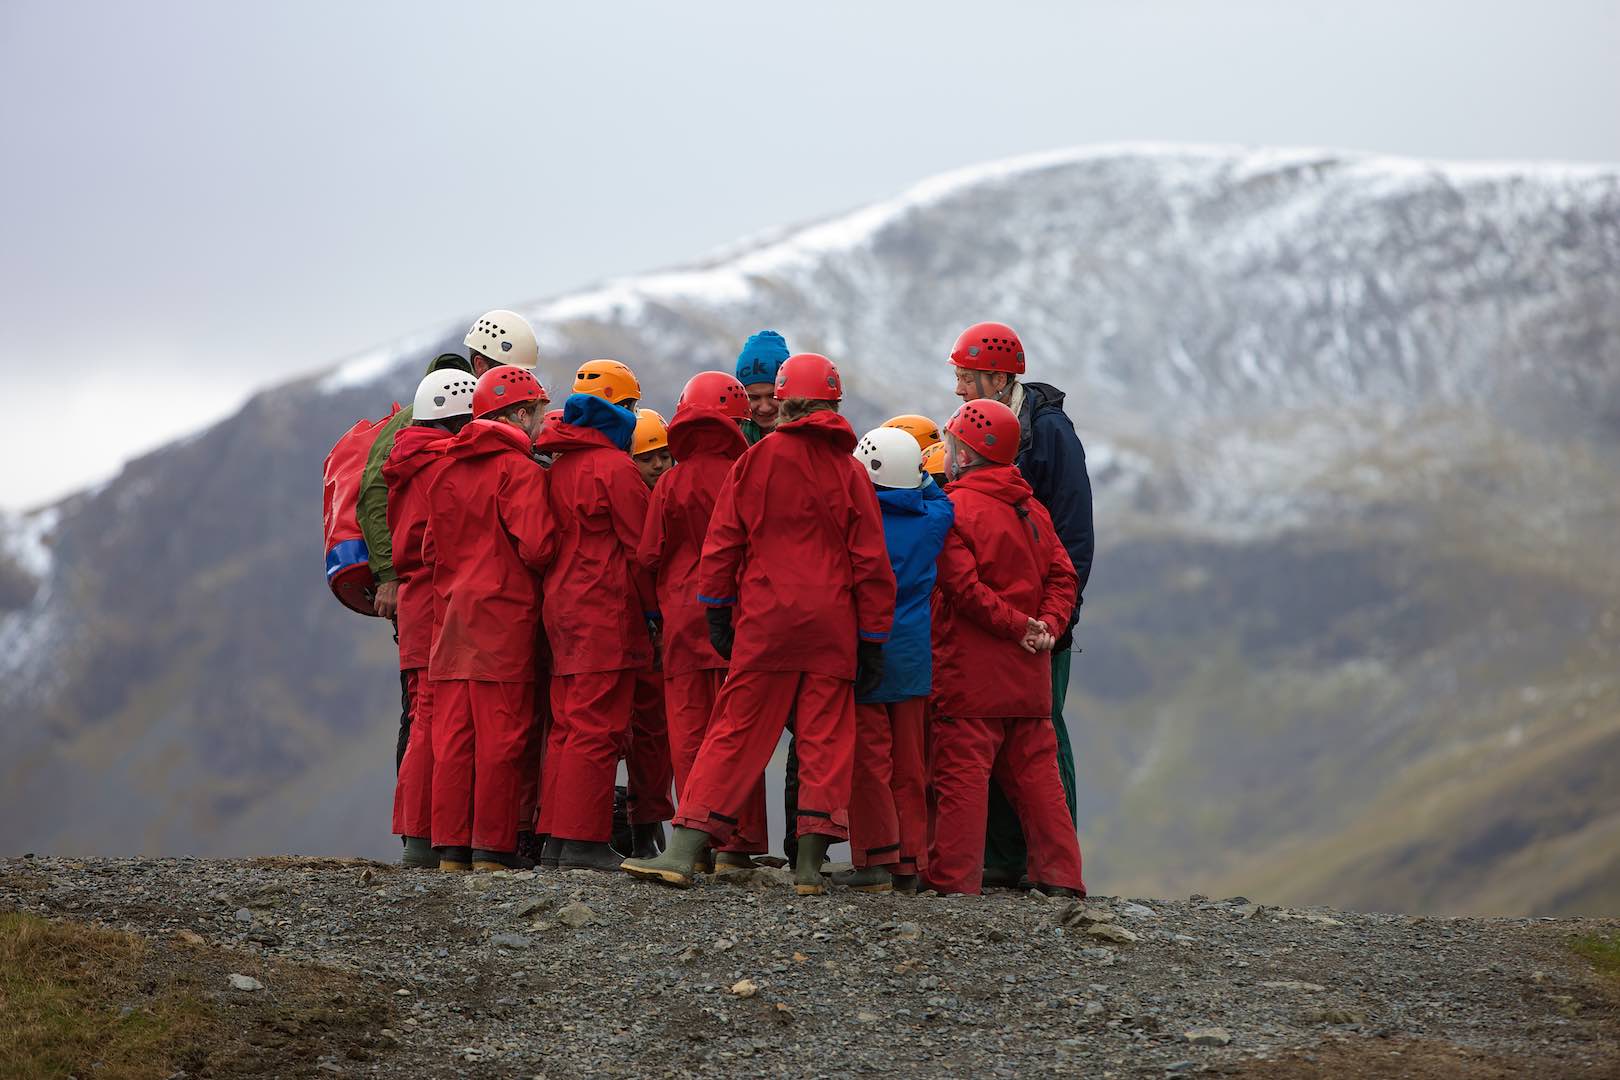 Primary pupils huddled together among the mountains learning about geology 